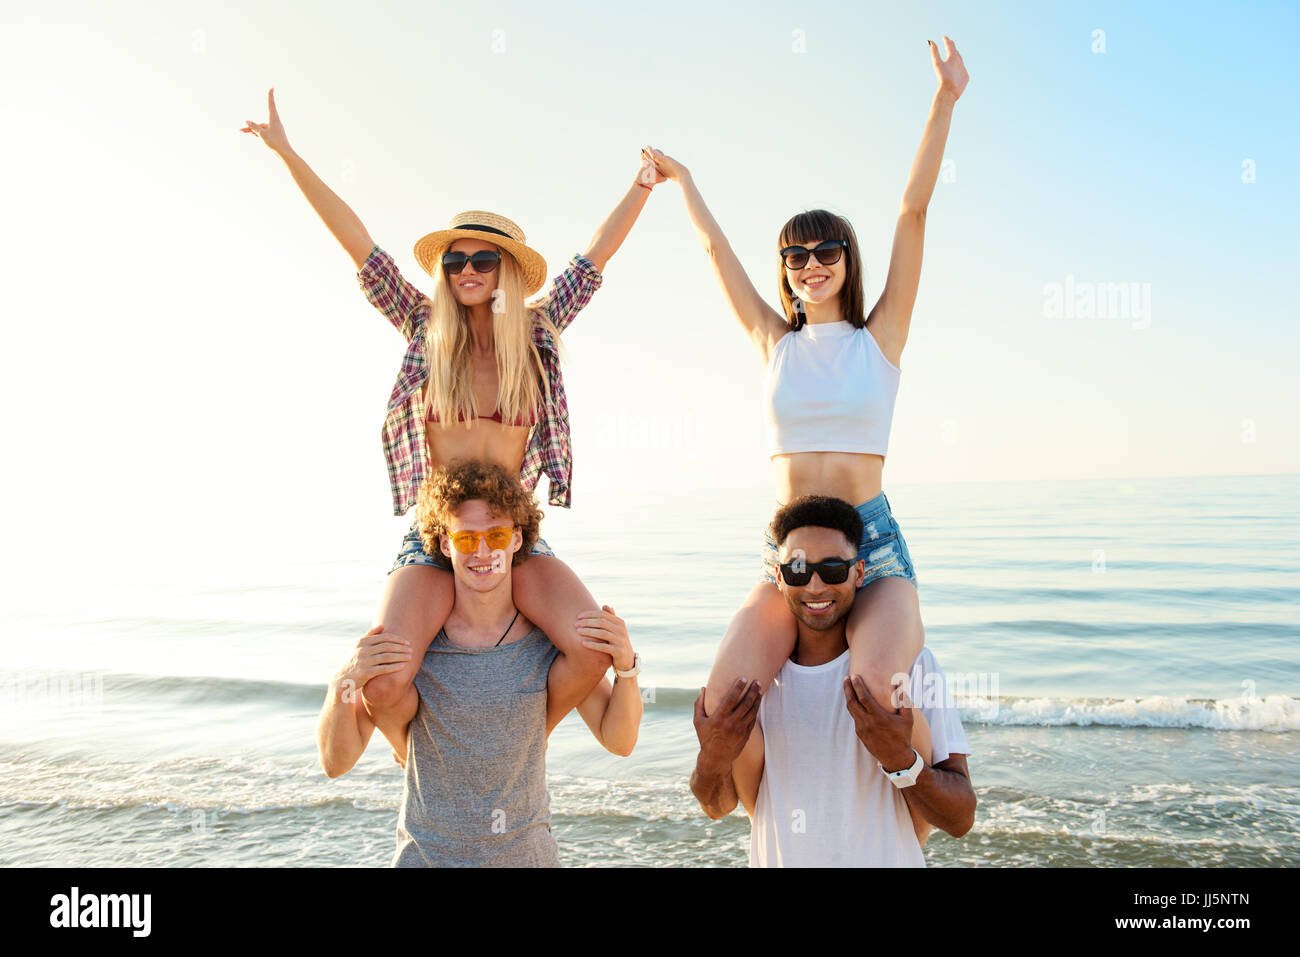 Happy smiling couples playing at the beach Stock Photo - Alamy